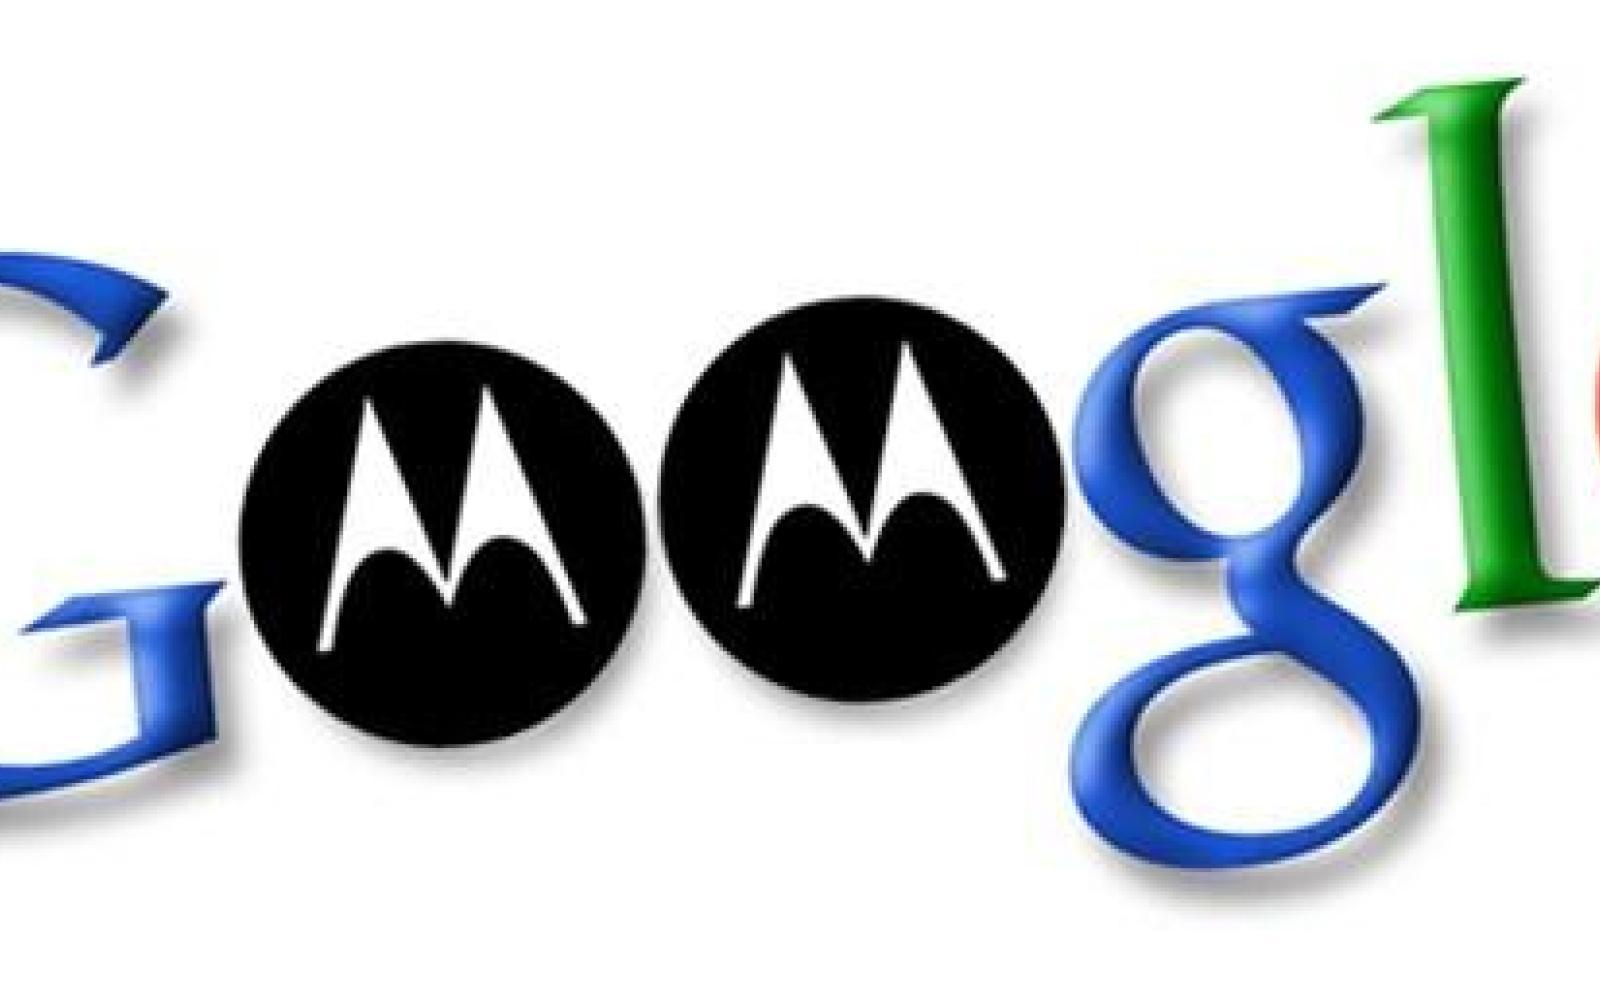 New Motorola Mobility Logo - Supercharging Android: Google snaps up Motorola Mobility for $12.5 ...